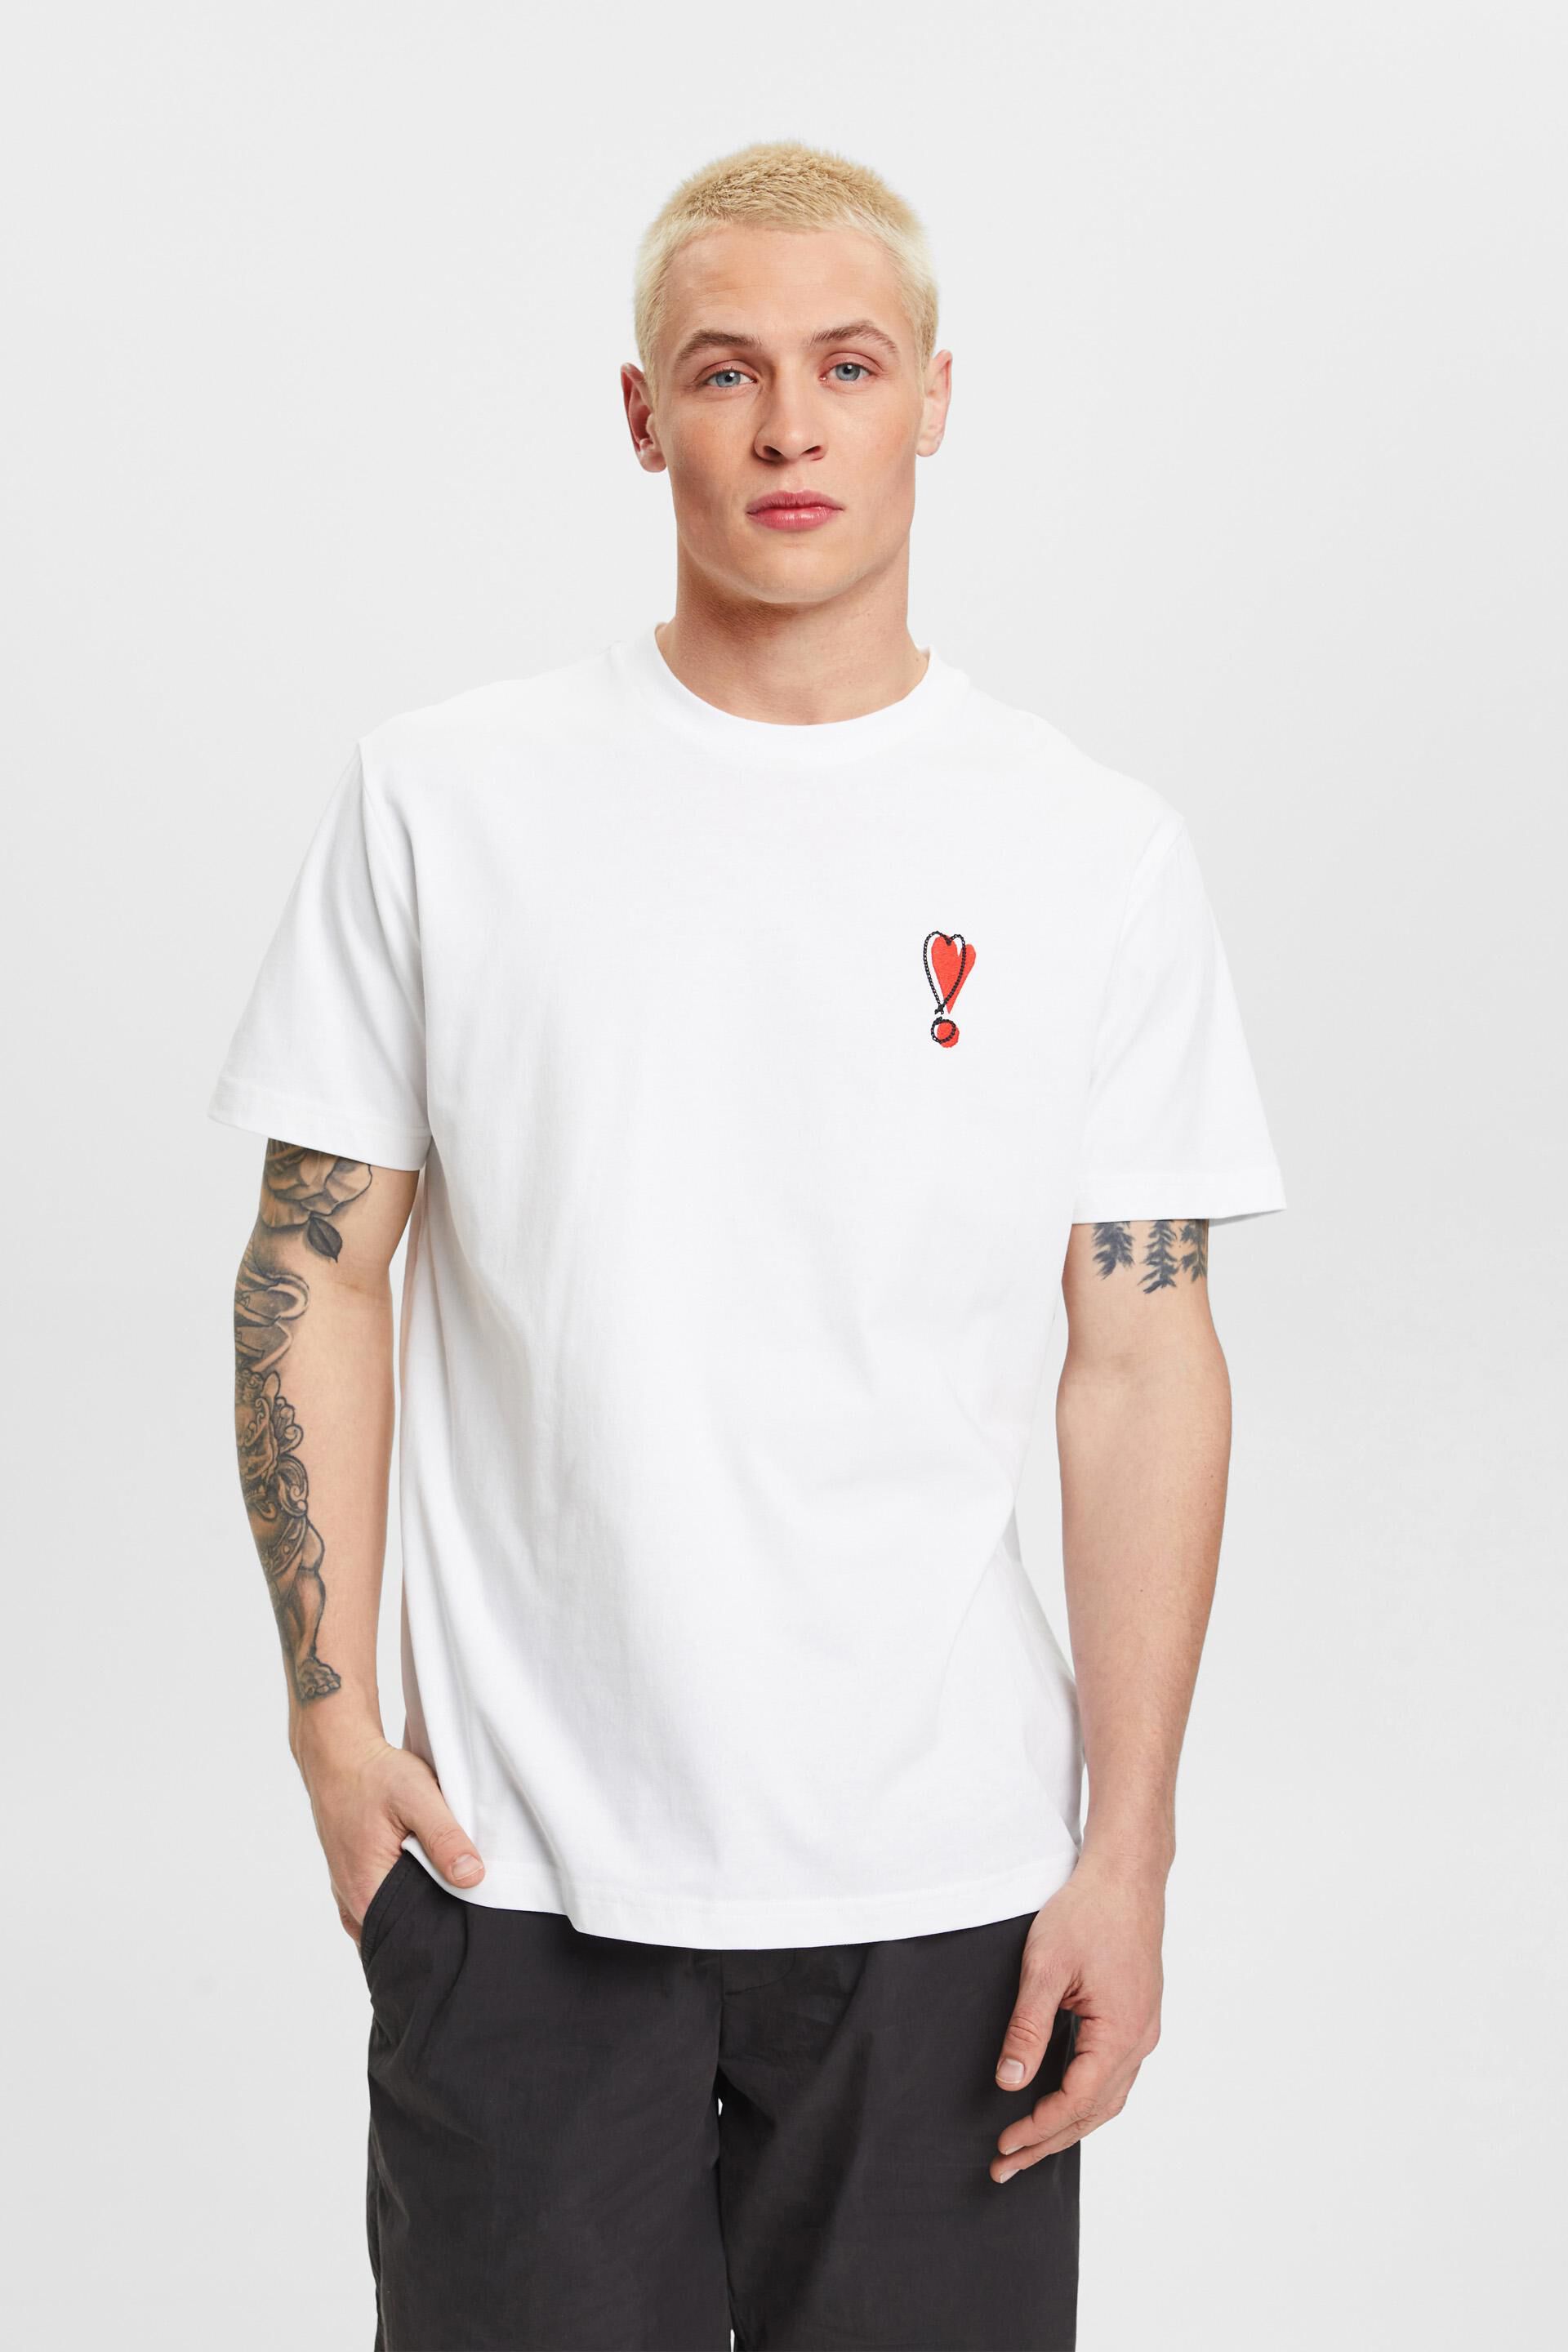 Esprit Sustainable with T-shirt cotton heart motif